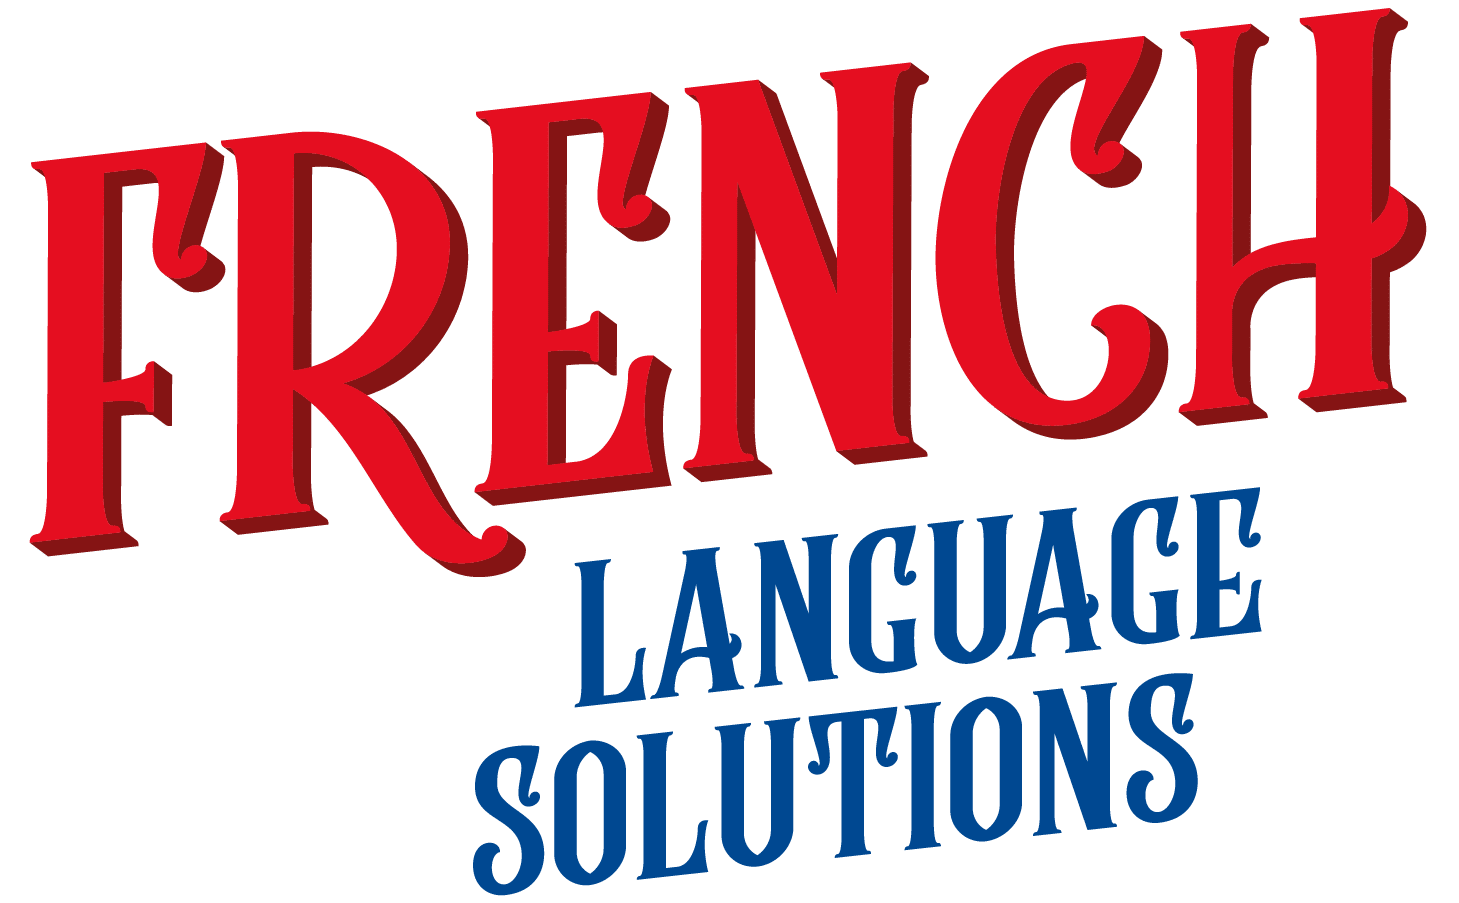 French Language Solutions